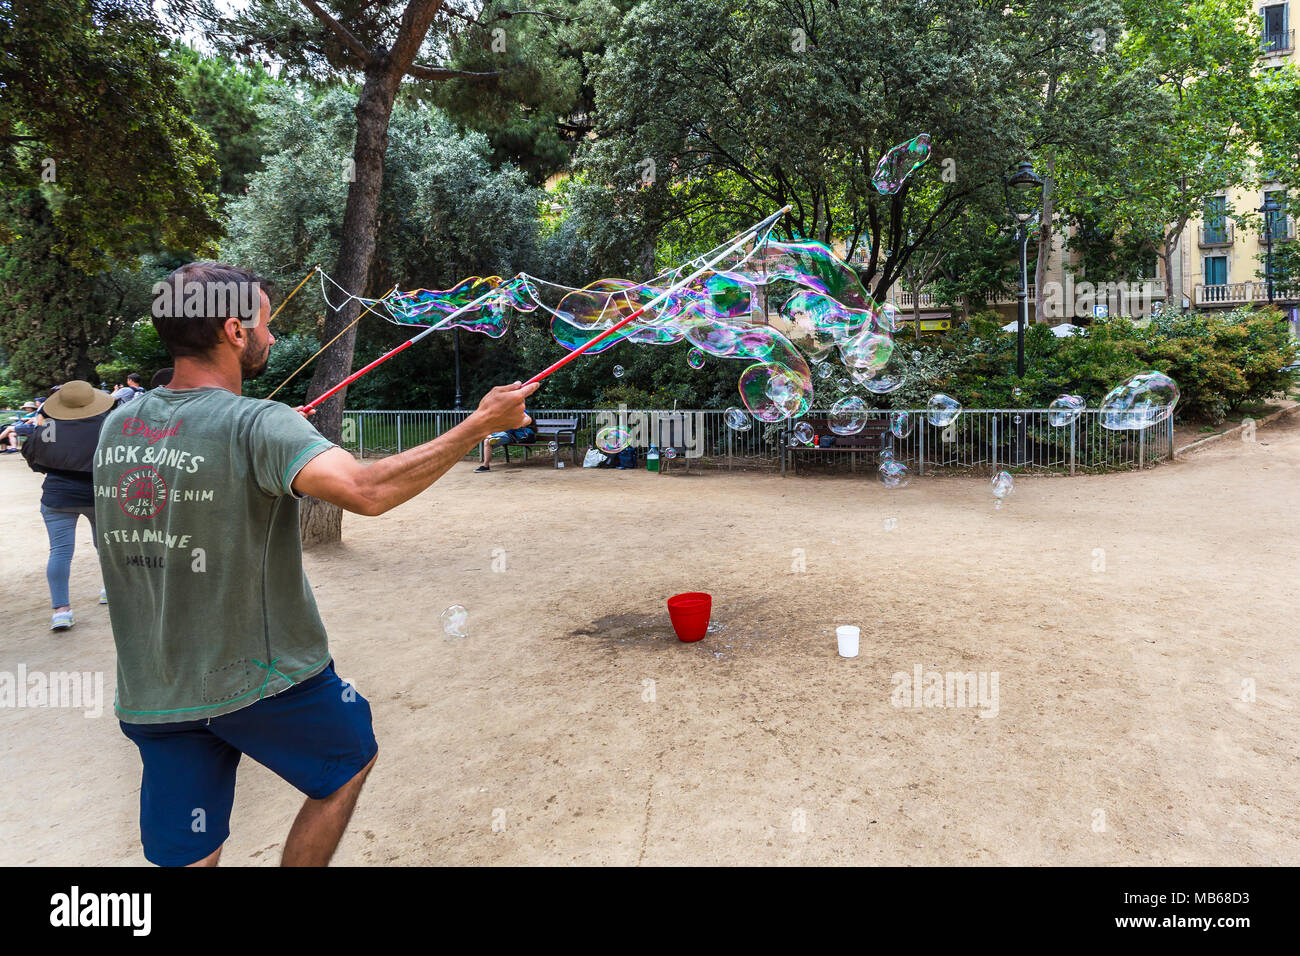 BARCELONA, SPAIN, July 6, 2017: Street artists make soap bubbles in the Plaza de Gaudi for the enjoyment of children and tourists Stock Photo